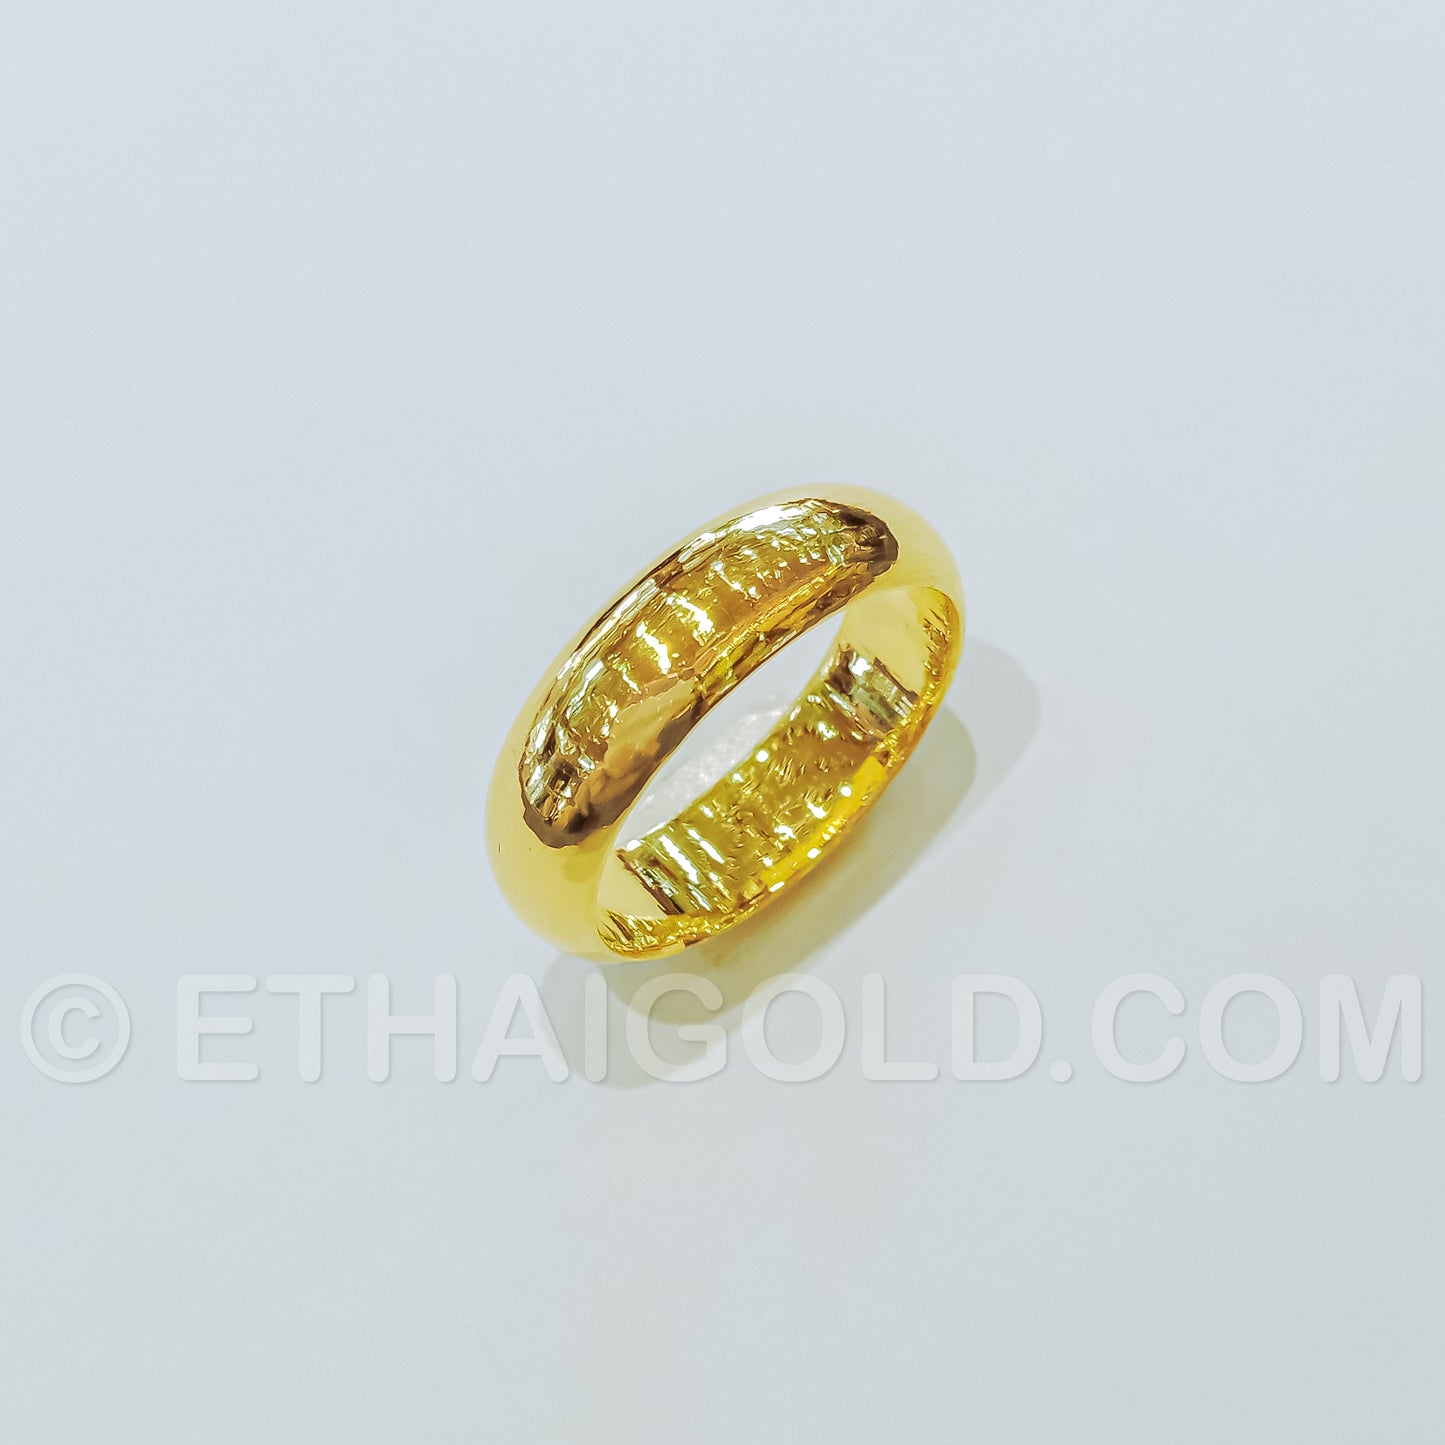 1/8 BAHT POLISHED SOLID DOMED WEDDING BAND RING IN 23K GOLD (ID: R040HS)